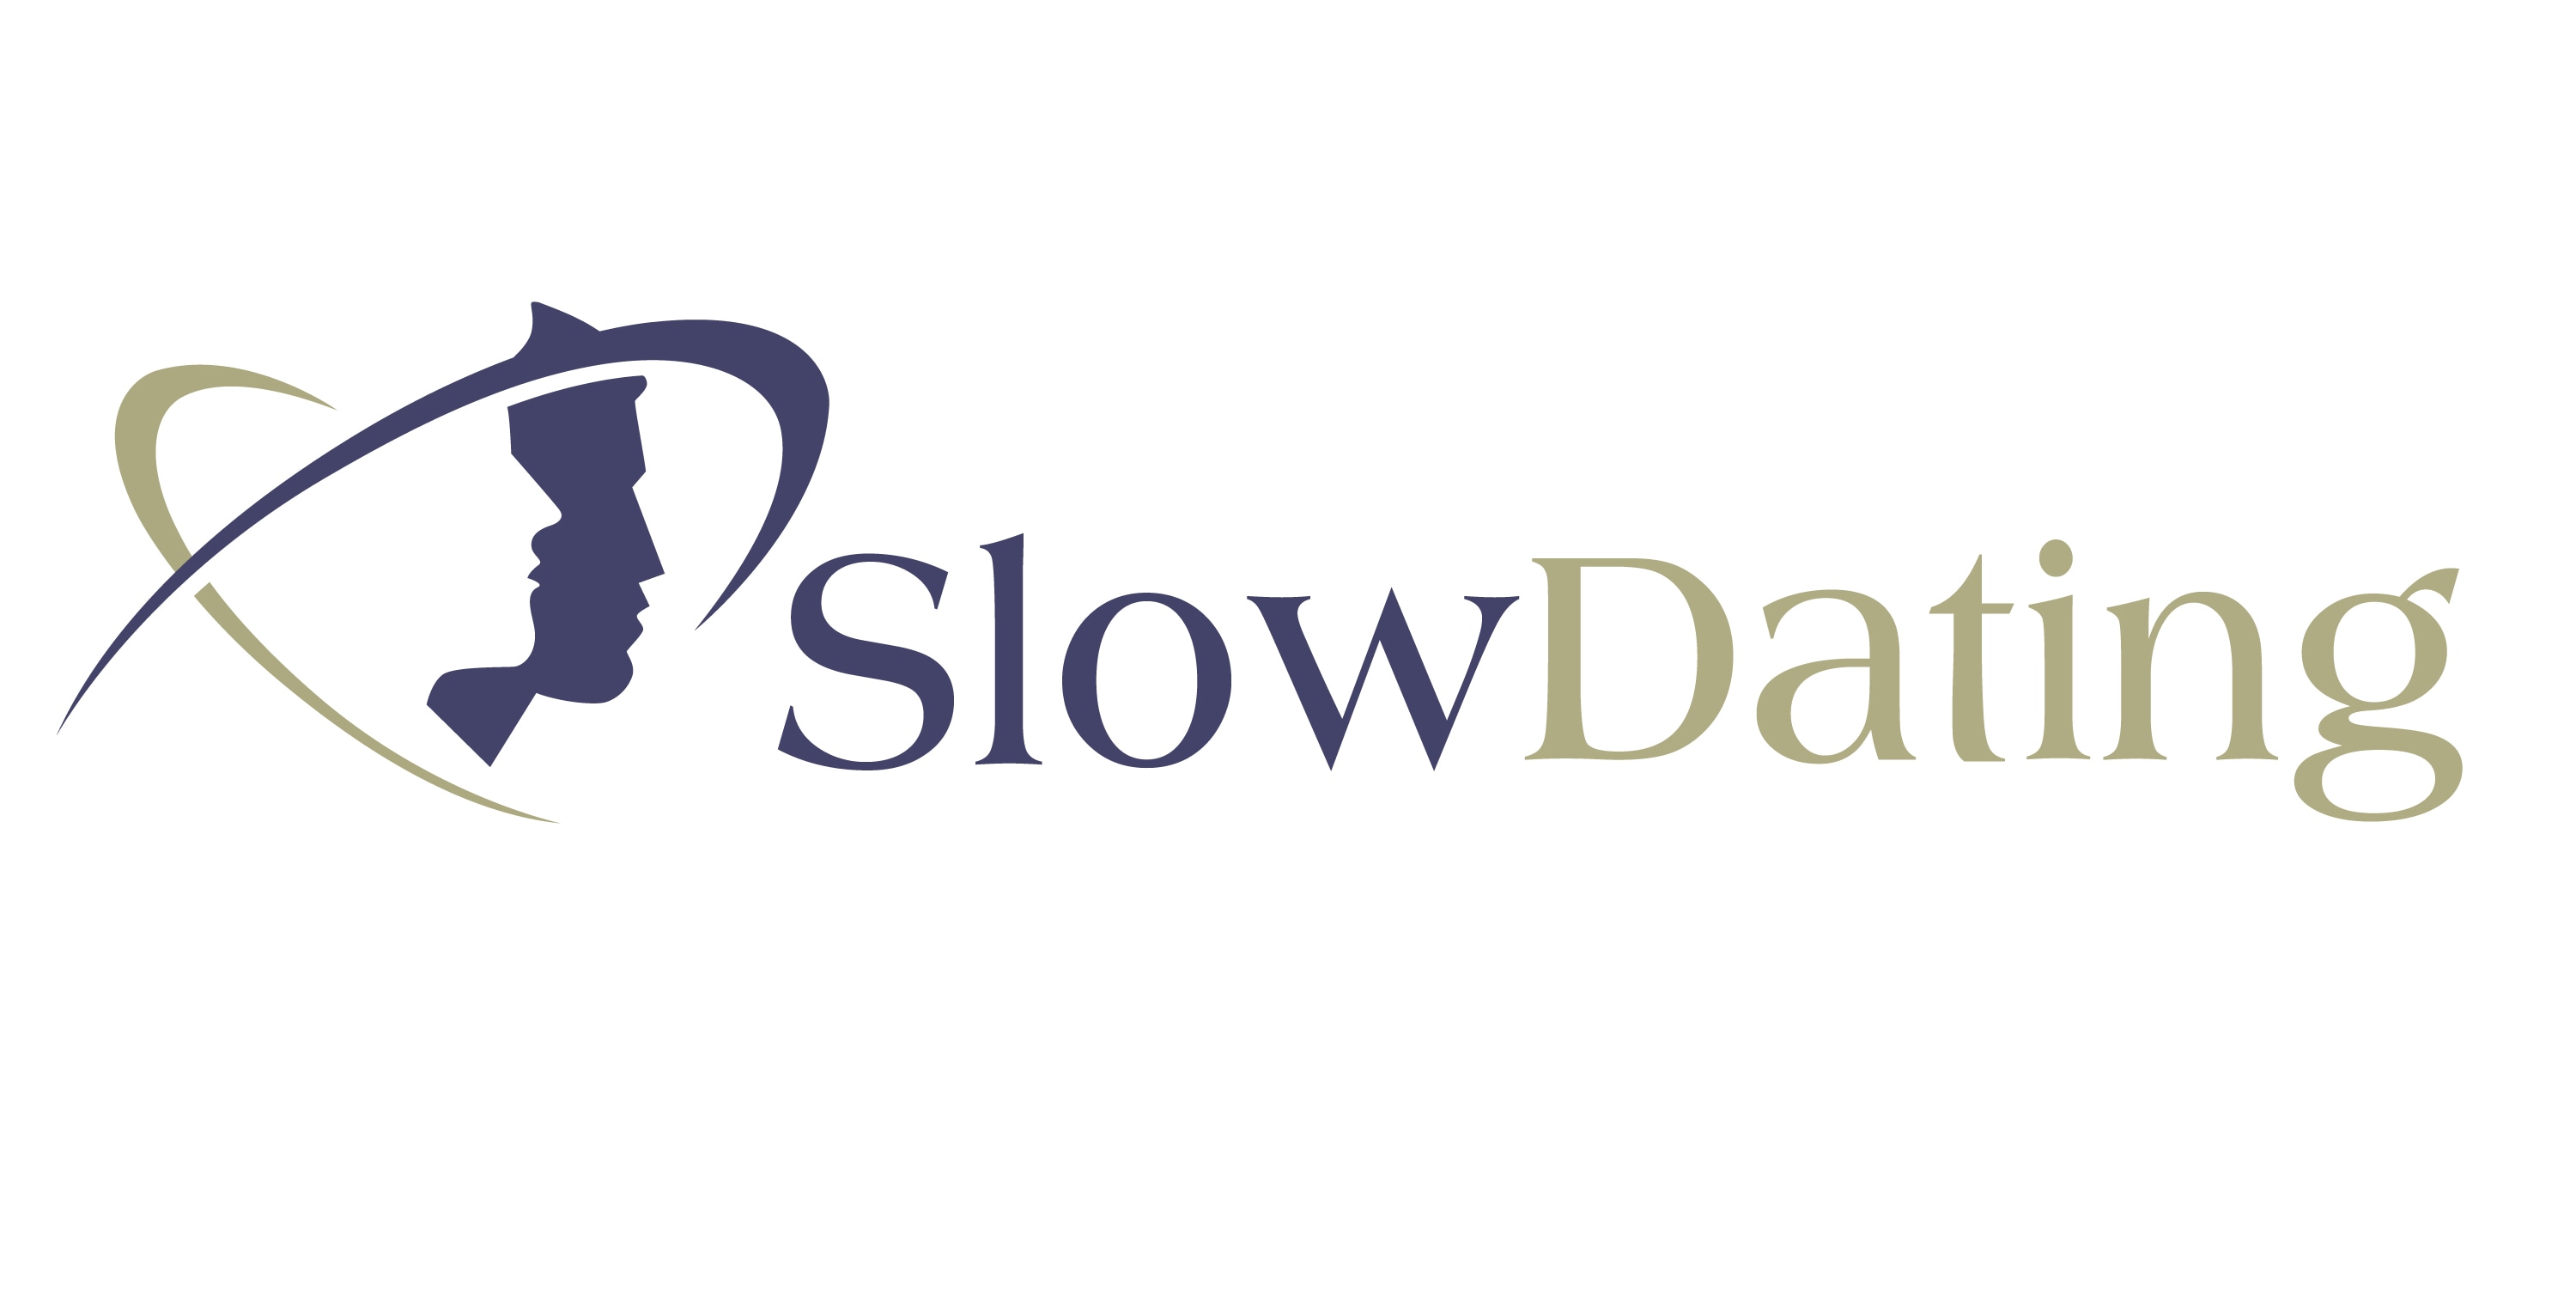 slow dating online dating